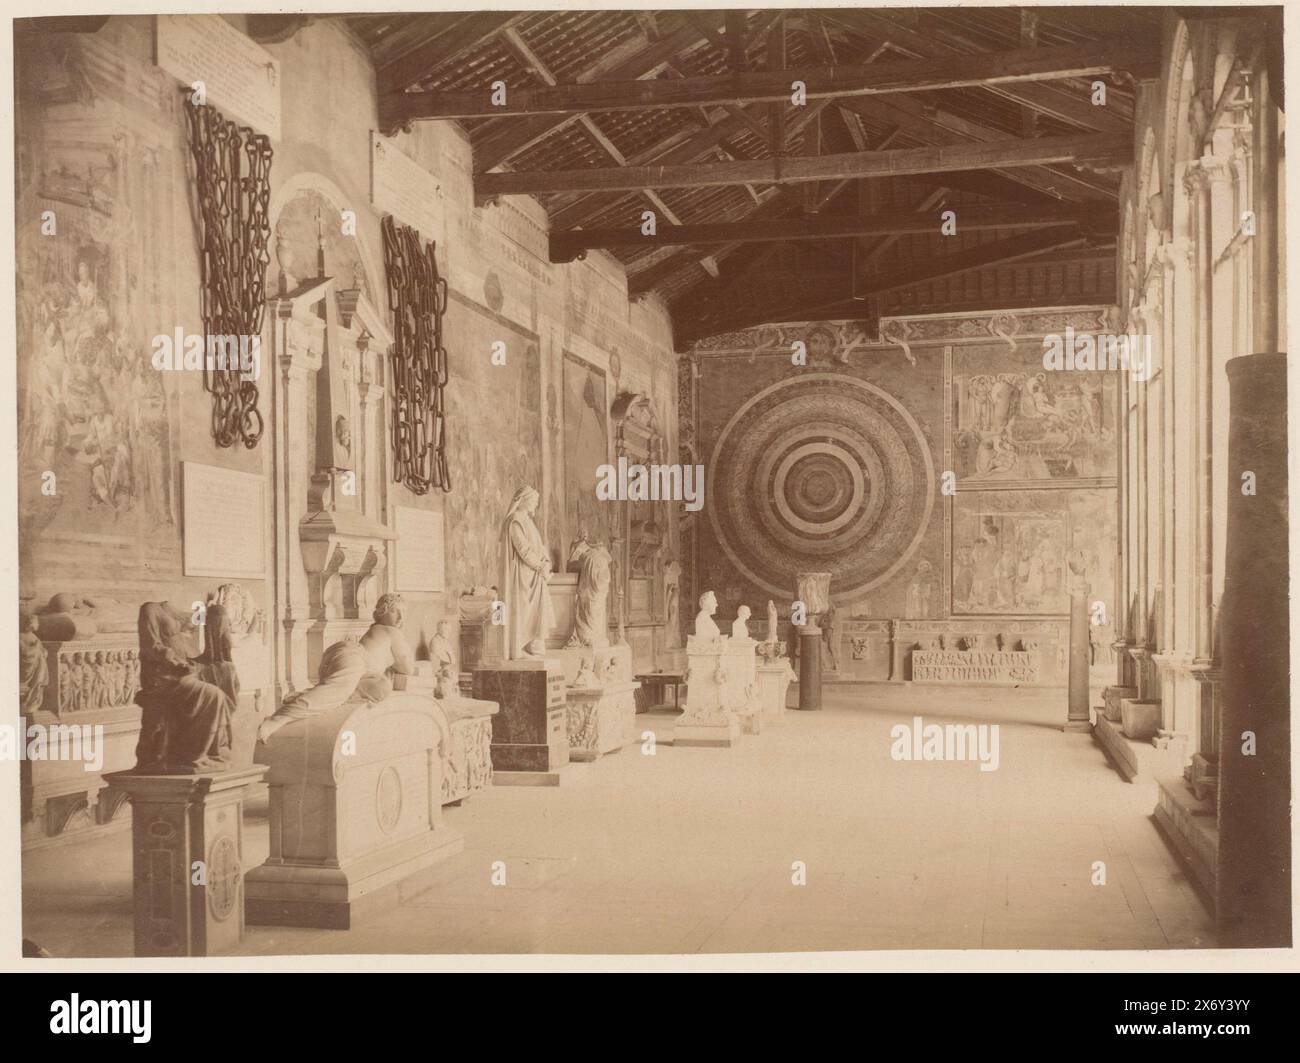 Interior of the west gallery in the Camposanto in Pisa, Italy, Galleria Ovest, del Camposanto (title on object), Pisa (series title on object), photograph, Alfredo Noack, (attributed to), Pisa, 1858 - 1893, cardboard, albumen print, height, 318 mm × width, 445 mm Stock Photo